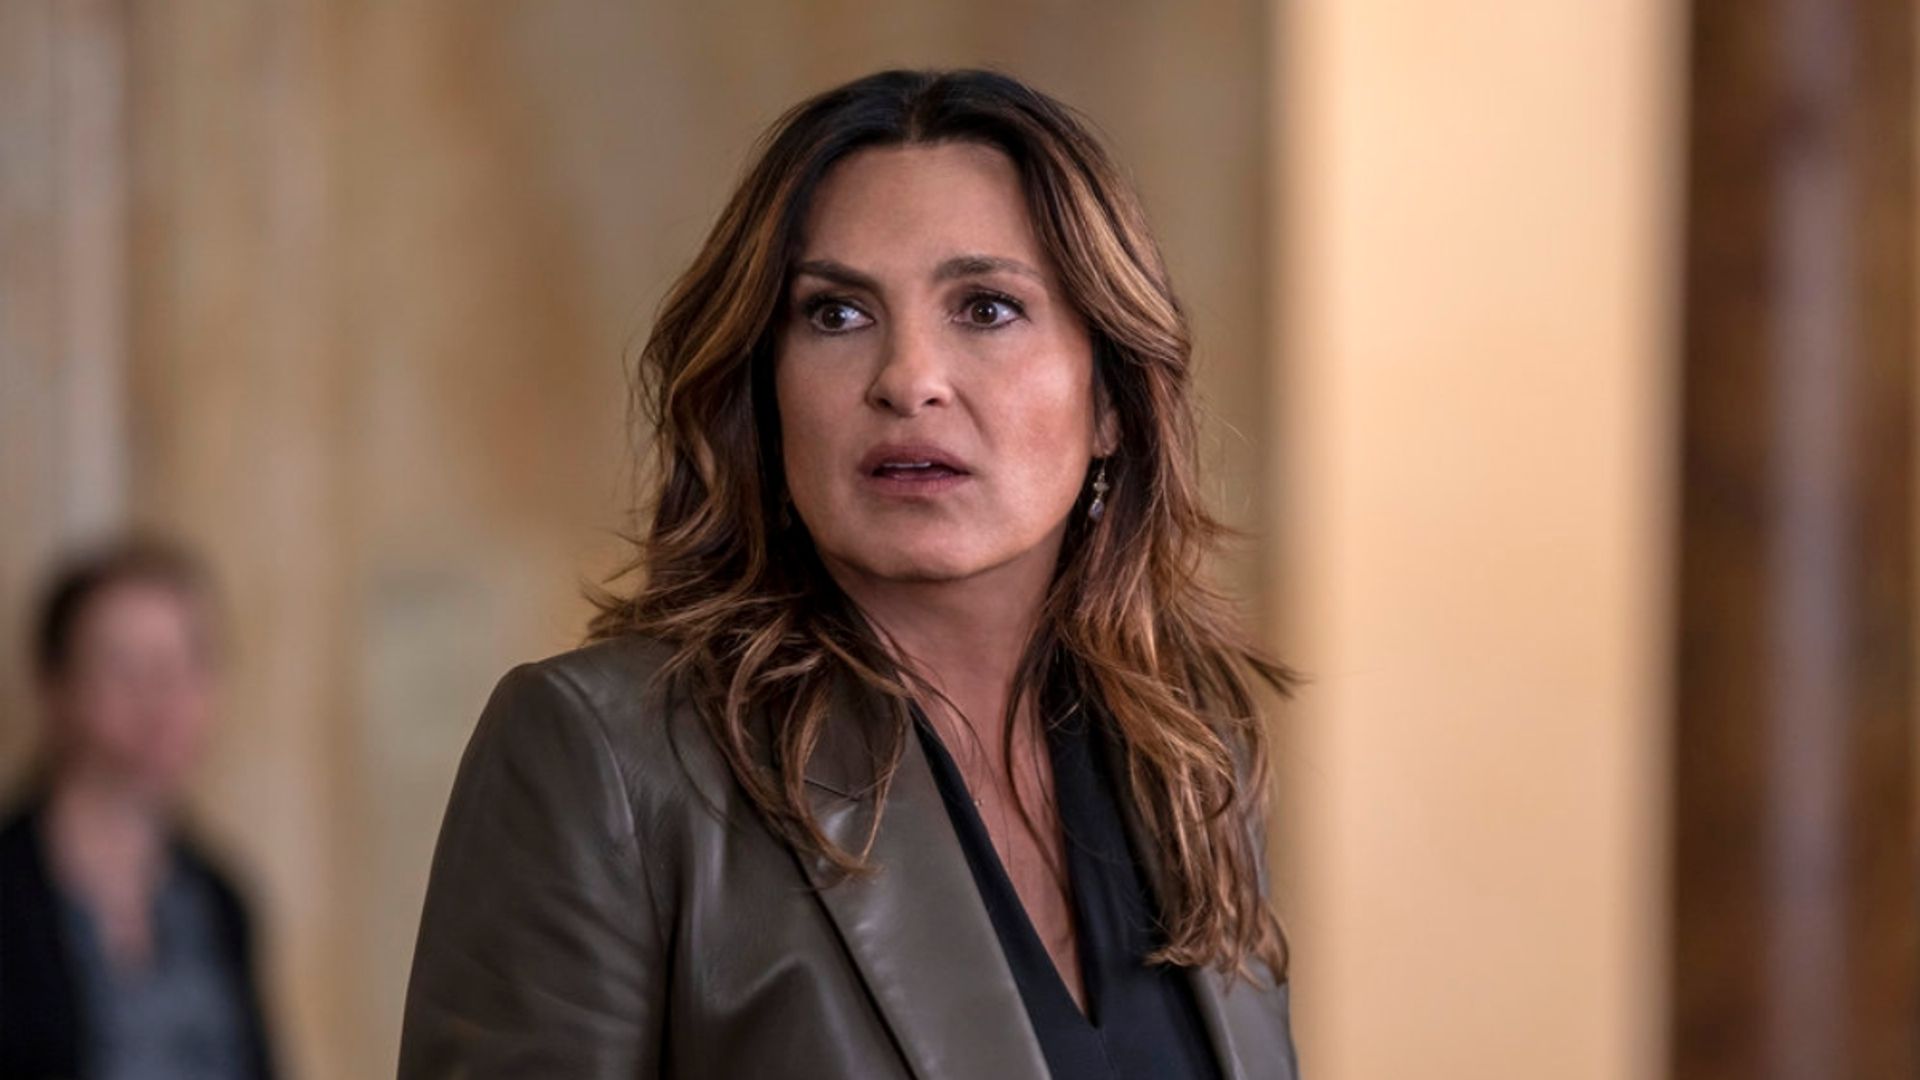 Law And Order Svu Star Mariska Hargitay Surprises Fans With Exciting